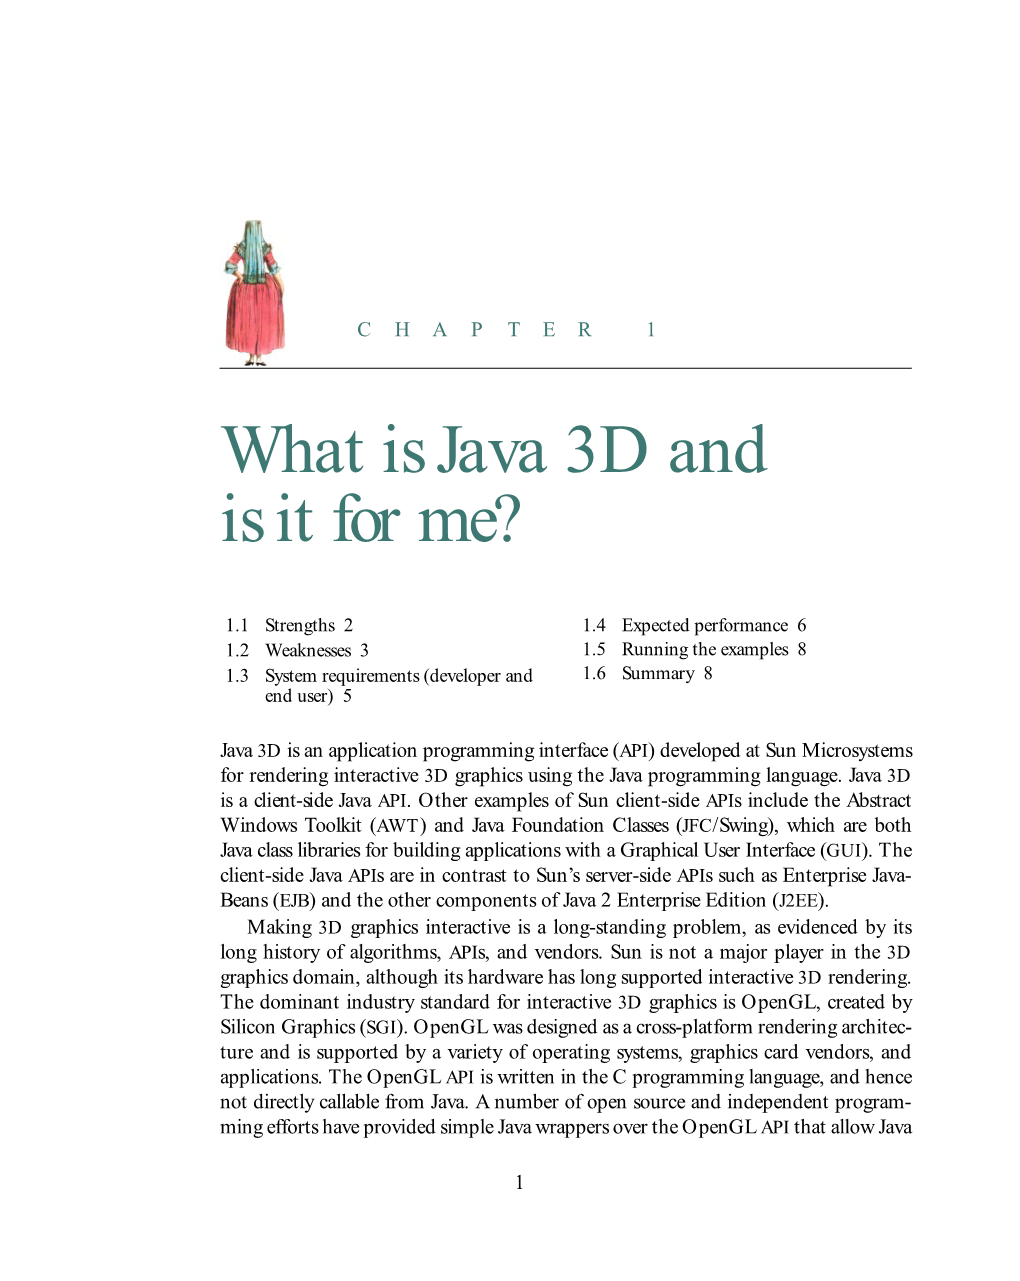 What Is Java 3D and Is It for Me?